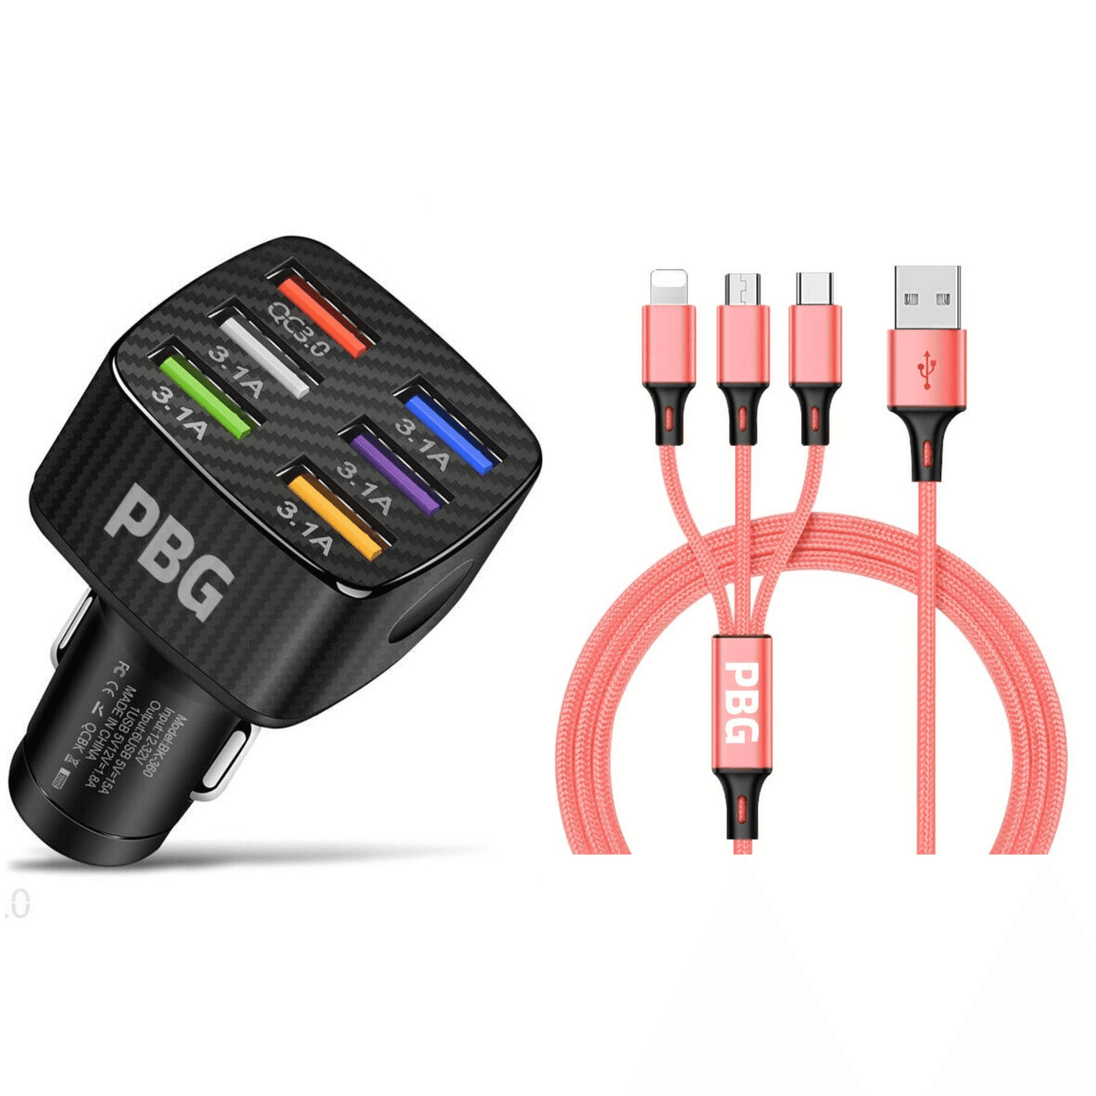 PBG LED 6 Port Car Charger and 4FT- 3 In 1 Cable Combo! - PremiumBrandGoods